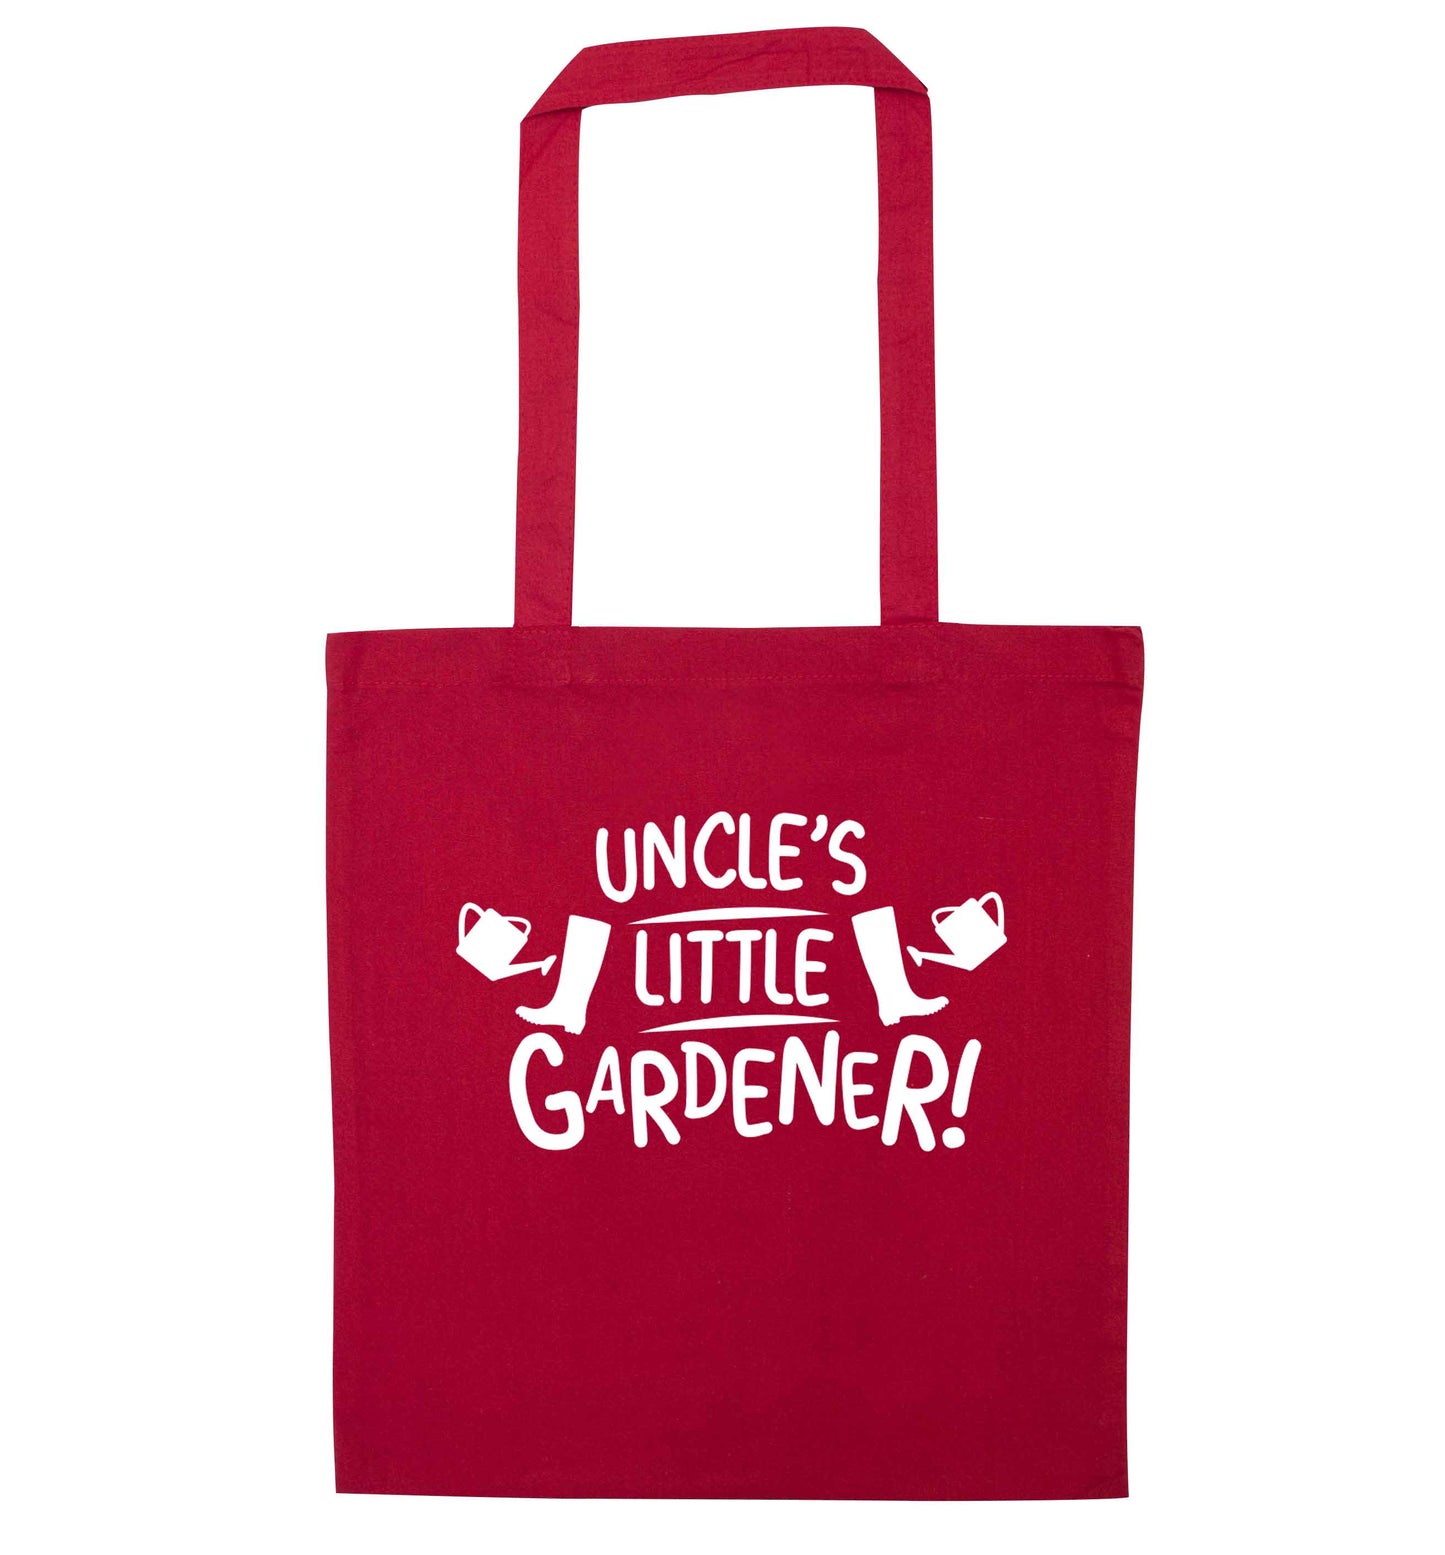 Uncle's little gardener red tote bag